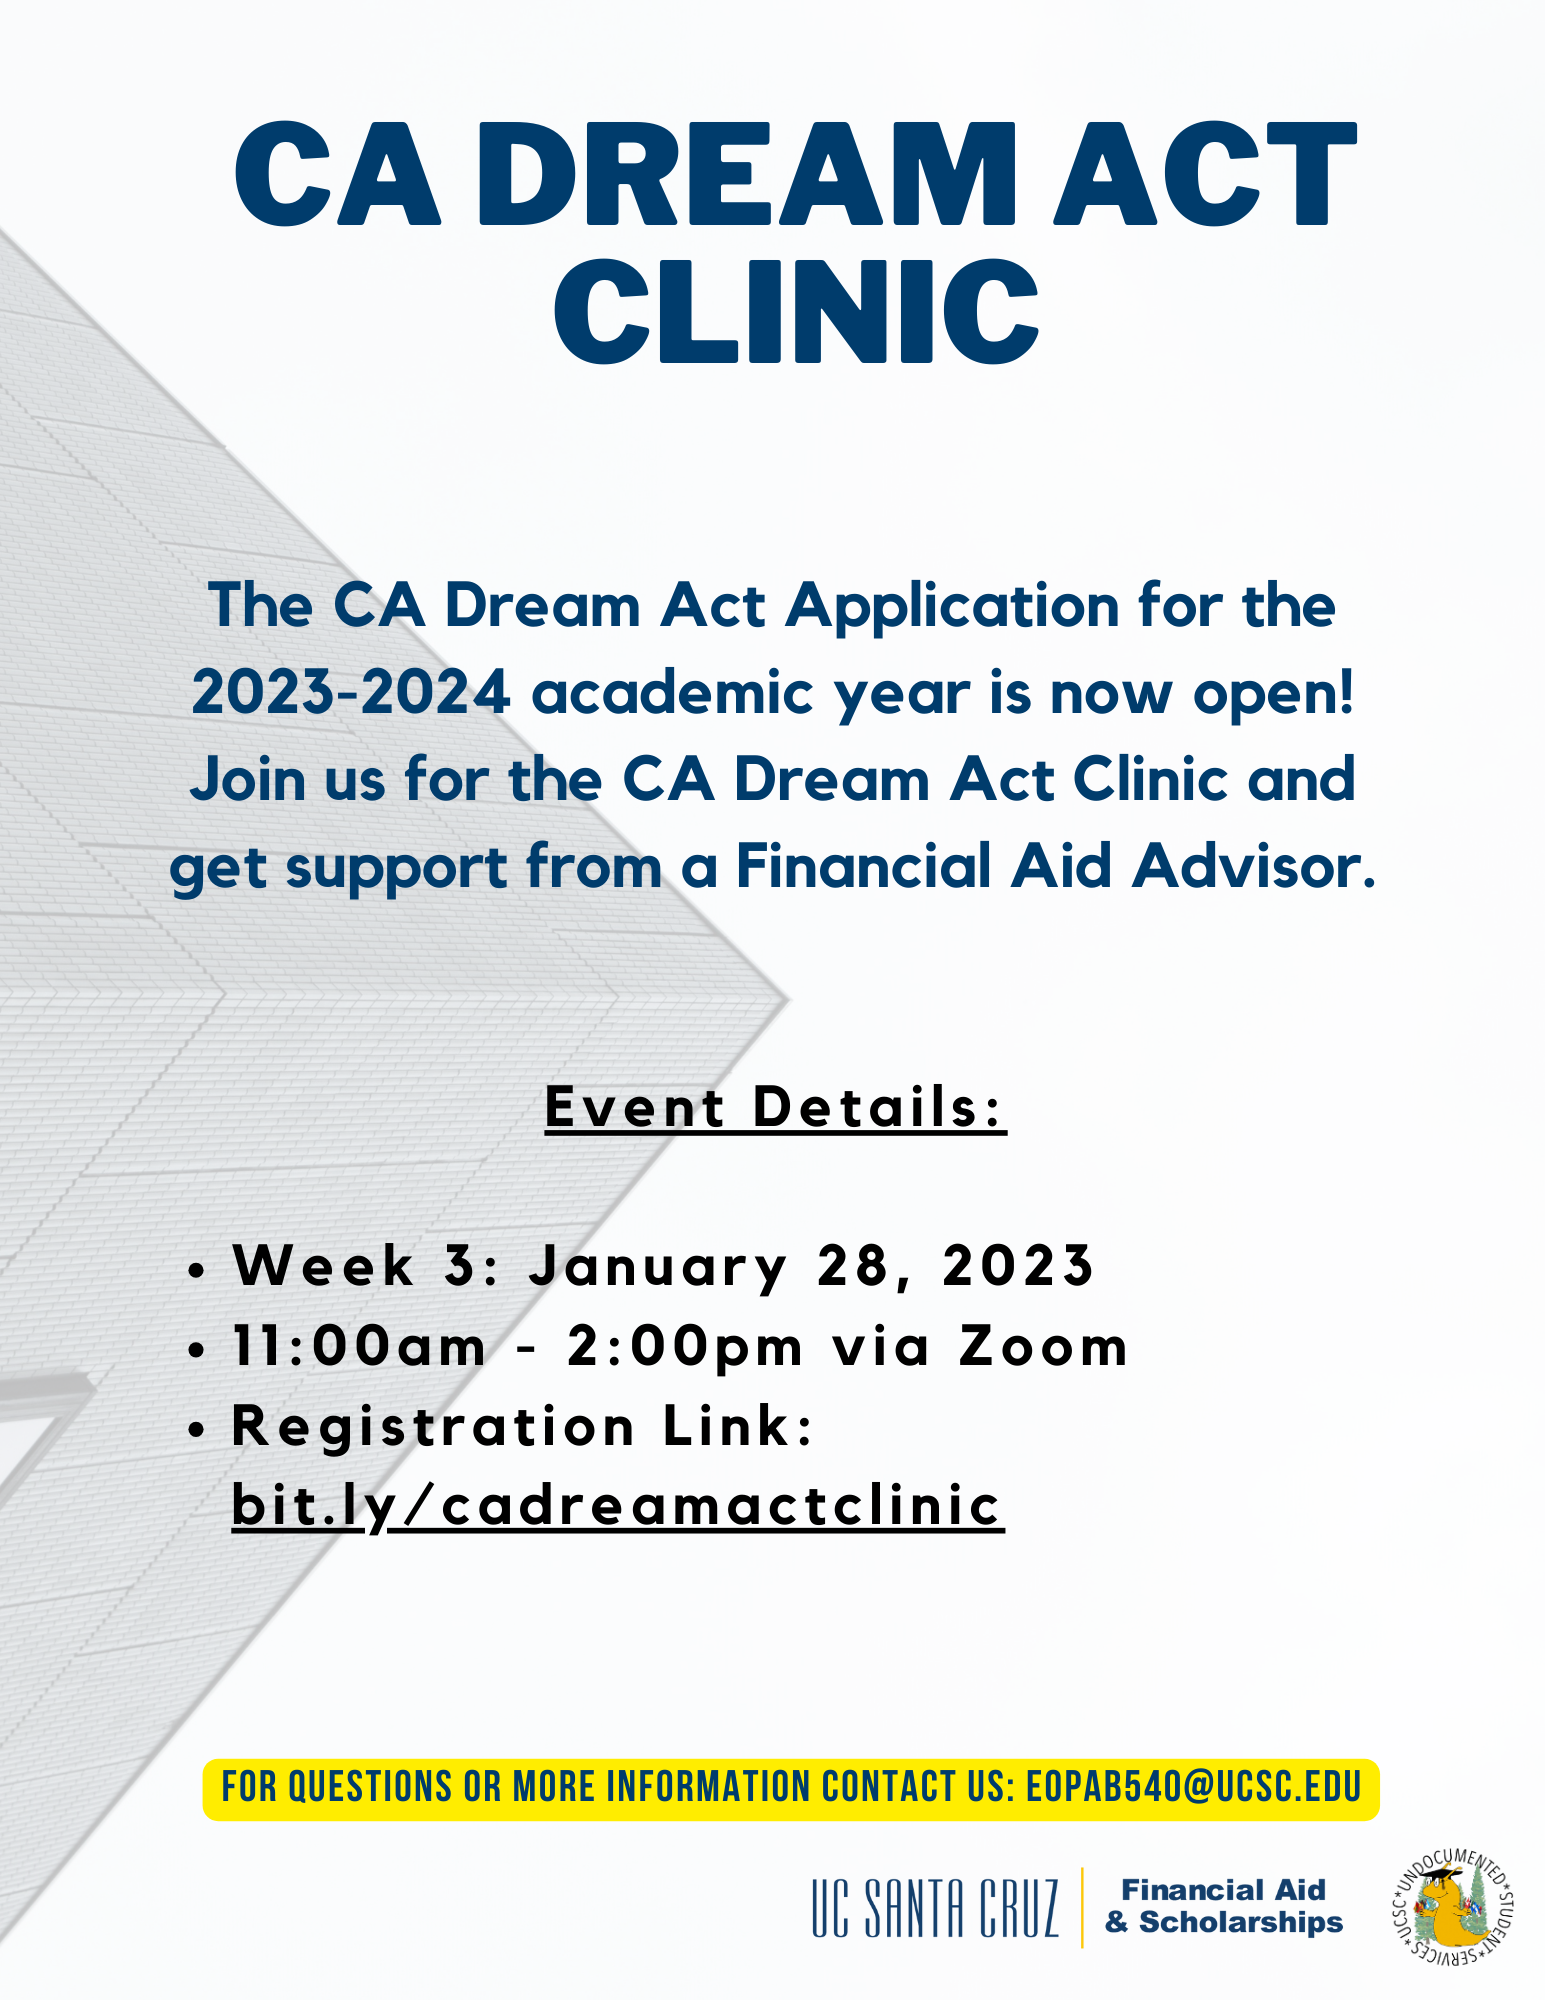 ca-dream-act-clinic.png